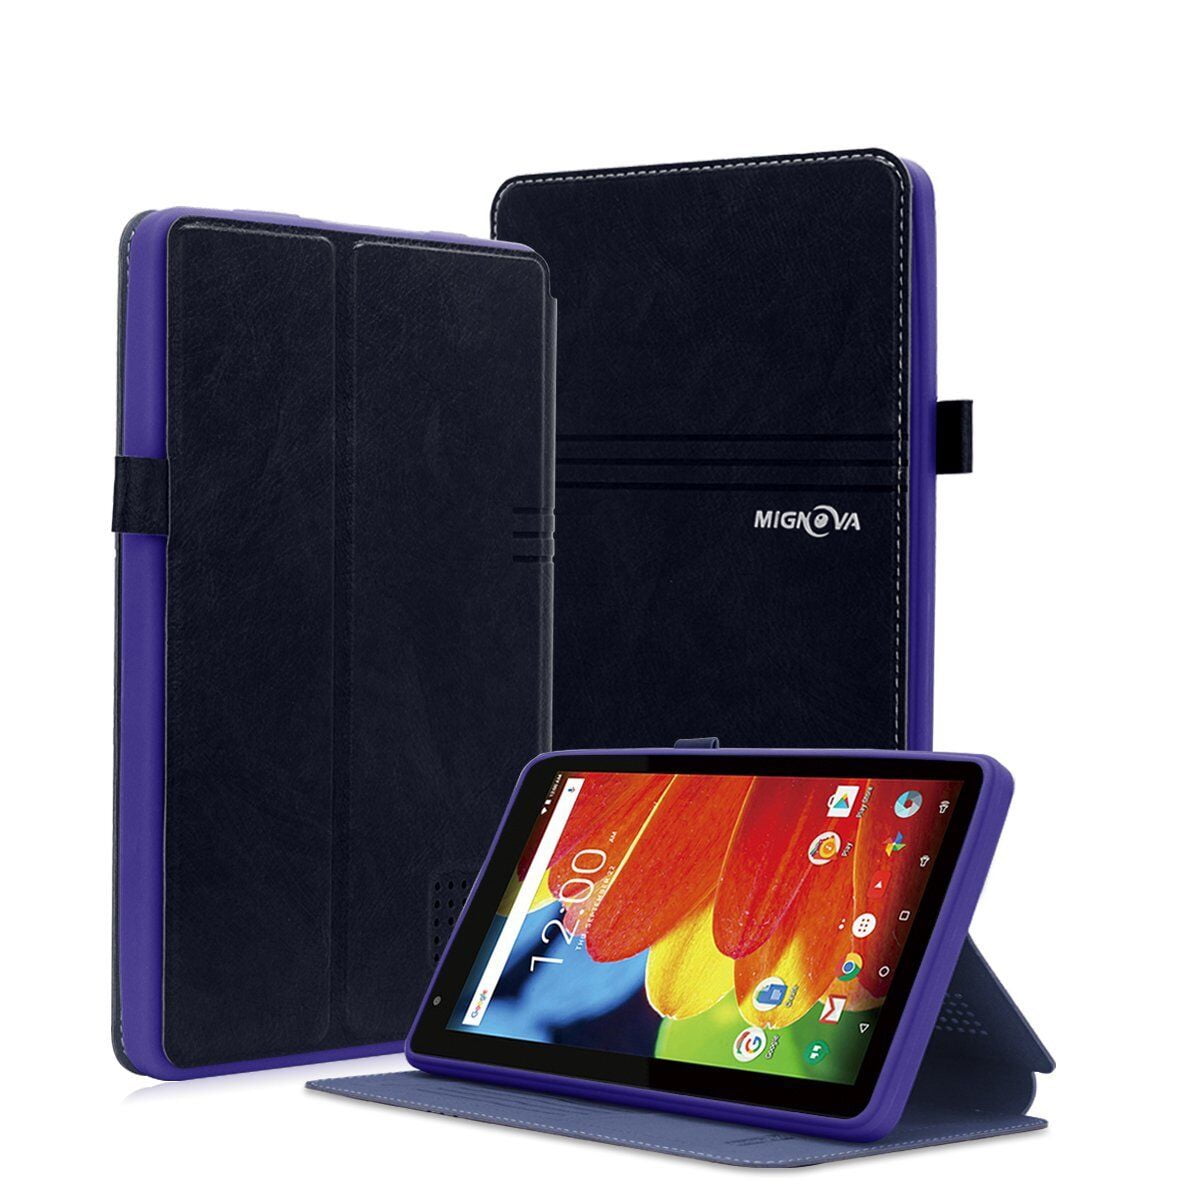 7 in rca voyager tablet case